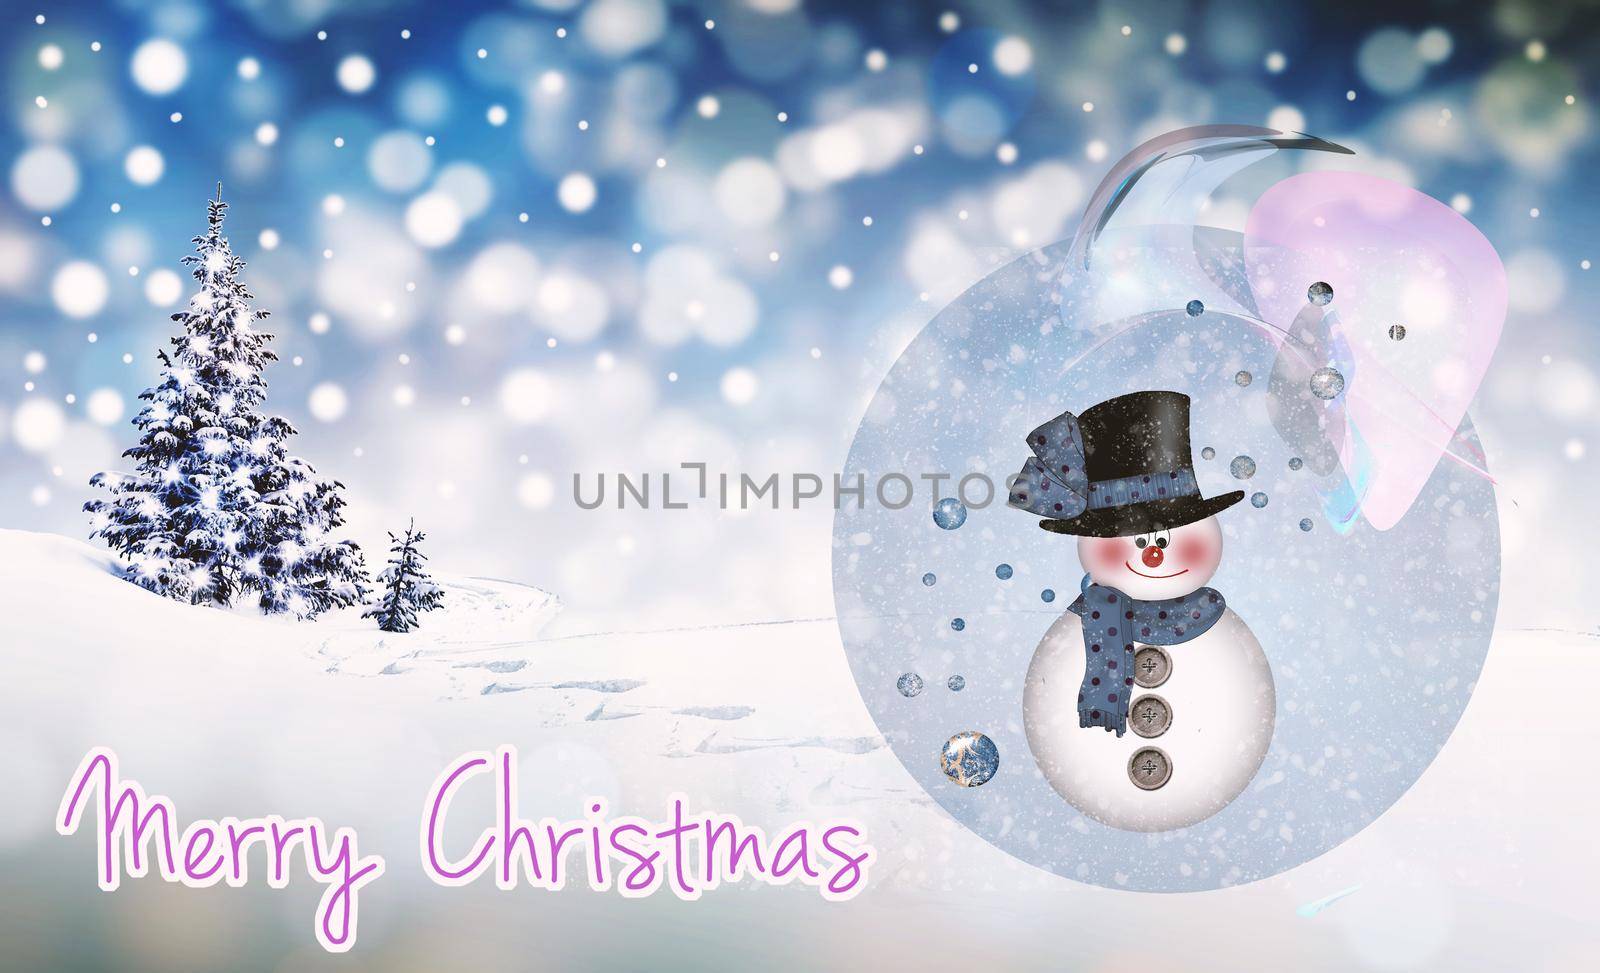 Beautiful Christmas card in vintage style with a picture of a snowman.